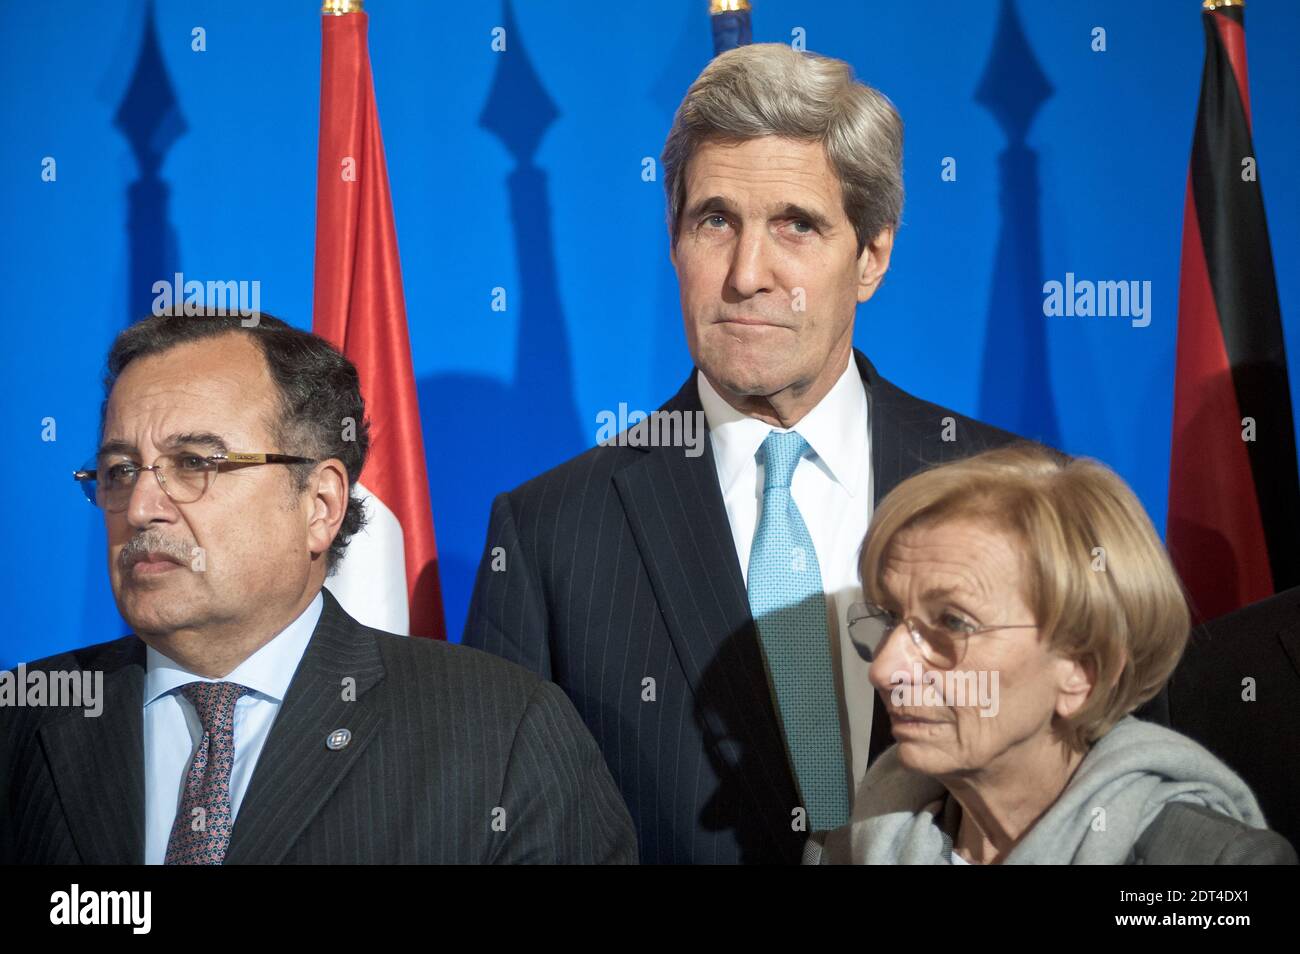 (L to R) Nabil Fahmy (Egypt), John Kerry (USA), Emma Bonino (Italy) pictured during a family photo at a press conference in Paris. The eleven countries of the Group of Friends of Syria met in Paris to convince the opposition to participate in Geneva-2. Laurent Fabius chaired the ministerial meeting, attended by the President of the Syrian Coalition, Ahmed Al-Jarba. Ministry of Foreign Affairs, in Paris, France, on January 12, 2014. Photo by Nicolas Messyasz/ABACAPRESS.COM Stock Photo